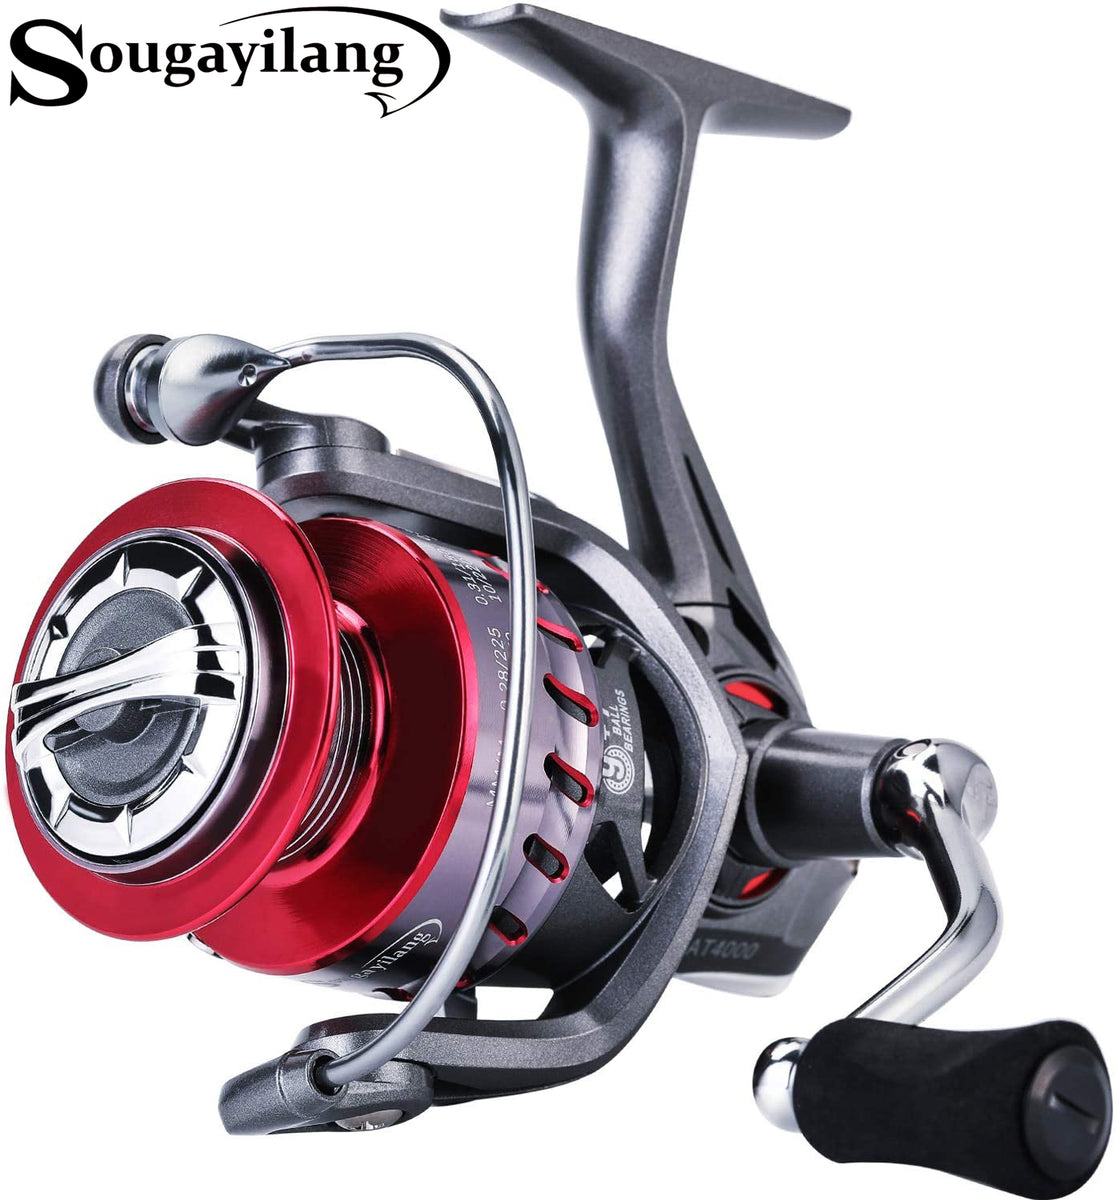 Sougayilang Spinning Reel 5.2:1/6.2:1 Light Smooth Fishing Reel with  Powerful Carbon Fiber Drag System for Saltwater or Freshwater